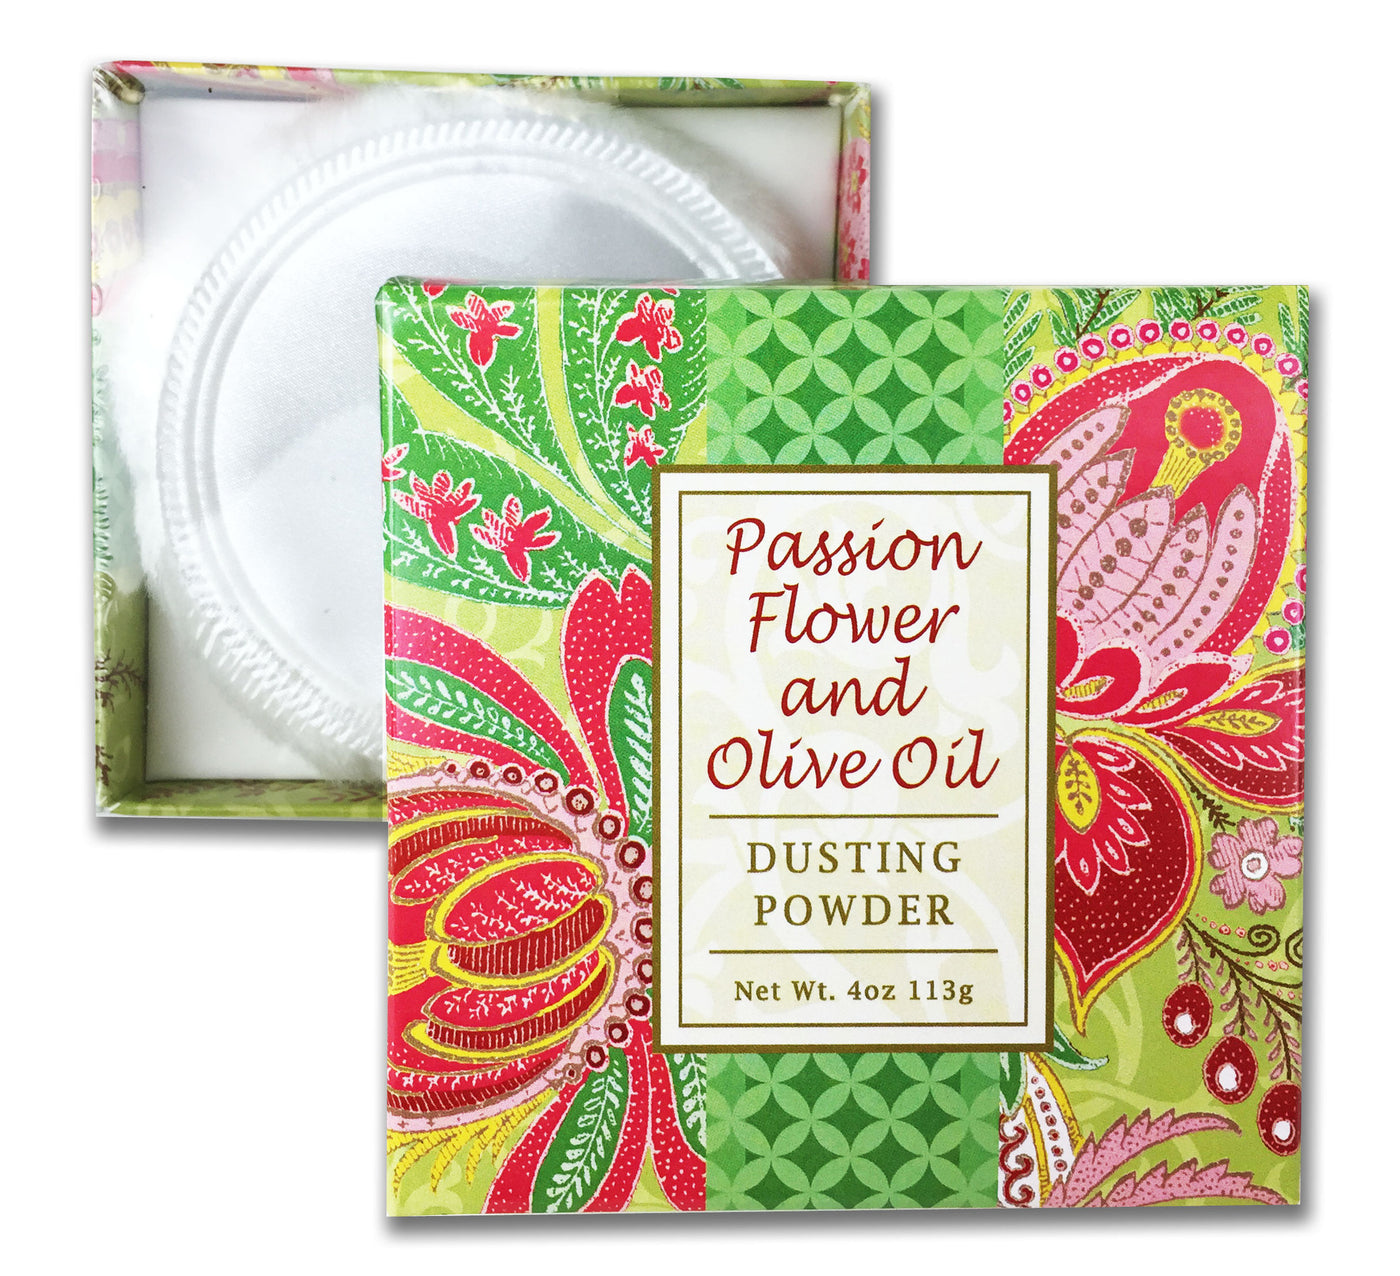 Passion Flower & Olive Oil Dusting Powder